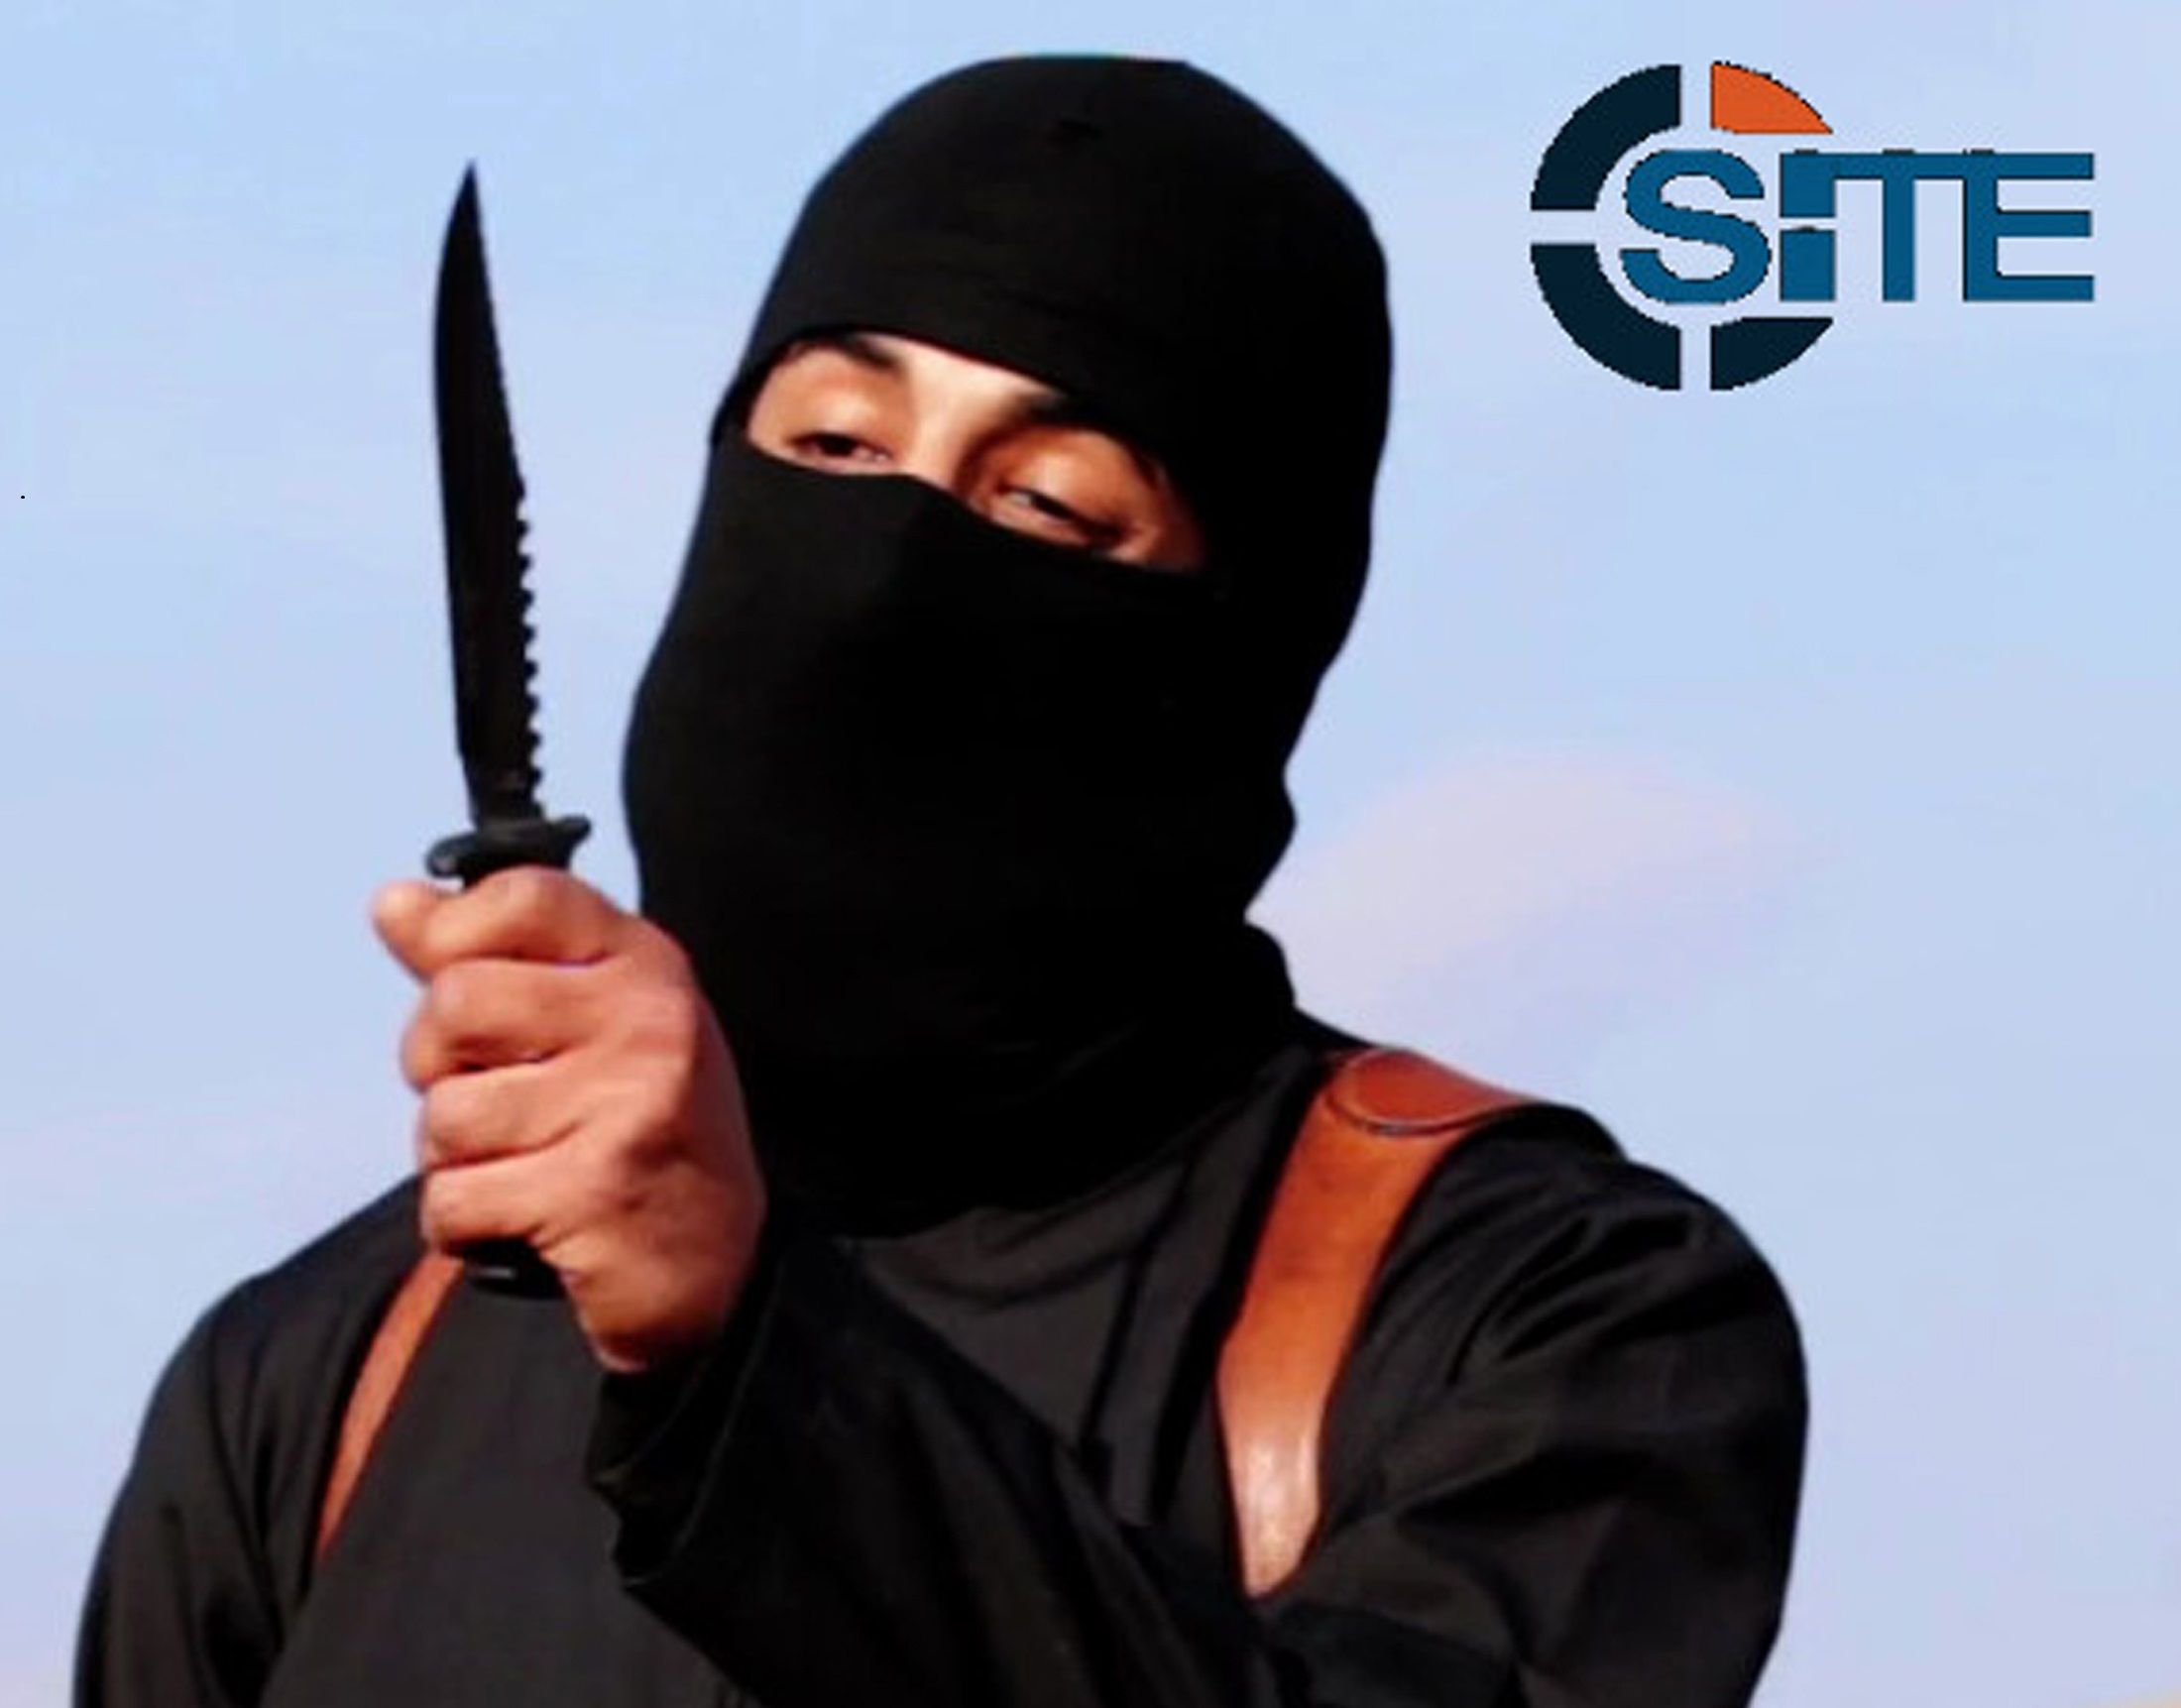 Isis Beheads Russian Spy In New Video Islamic State Fighter Vows Attacks Against Russia